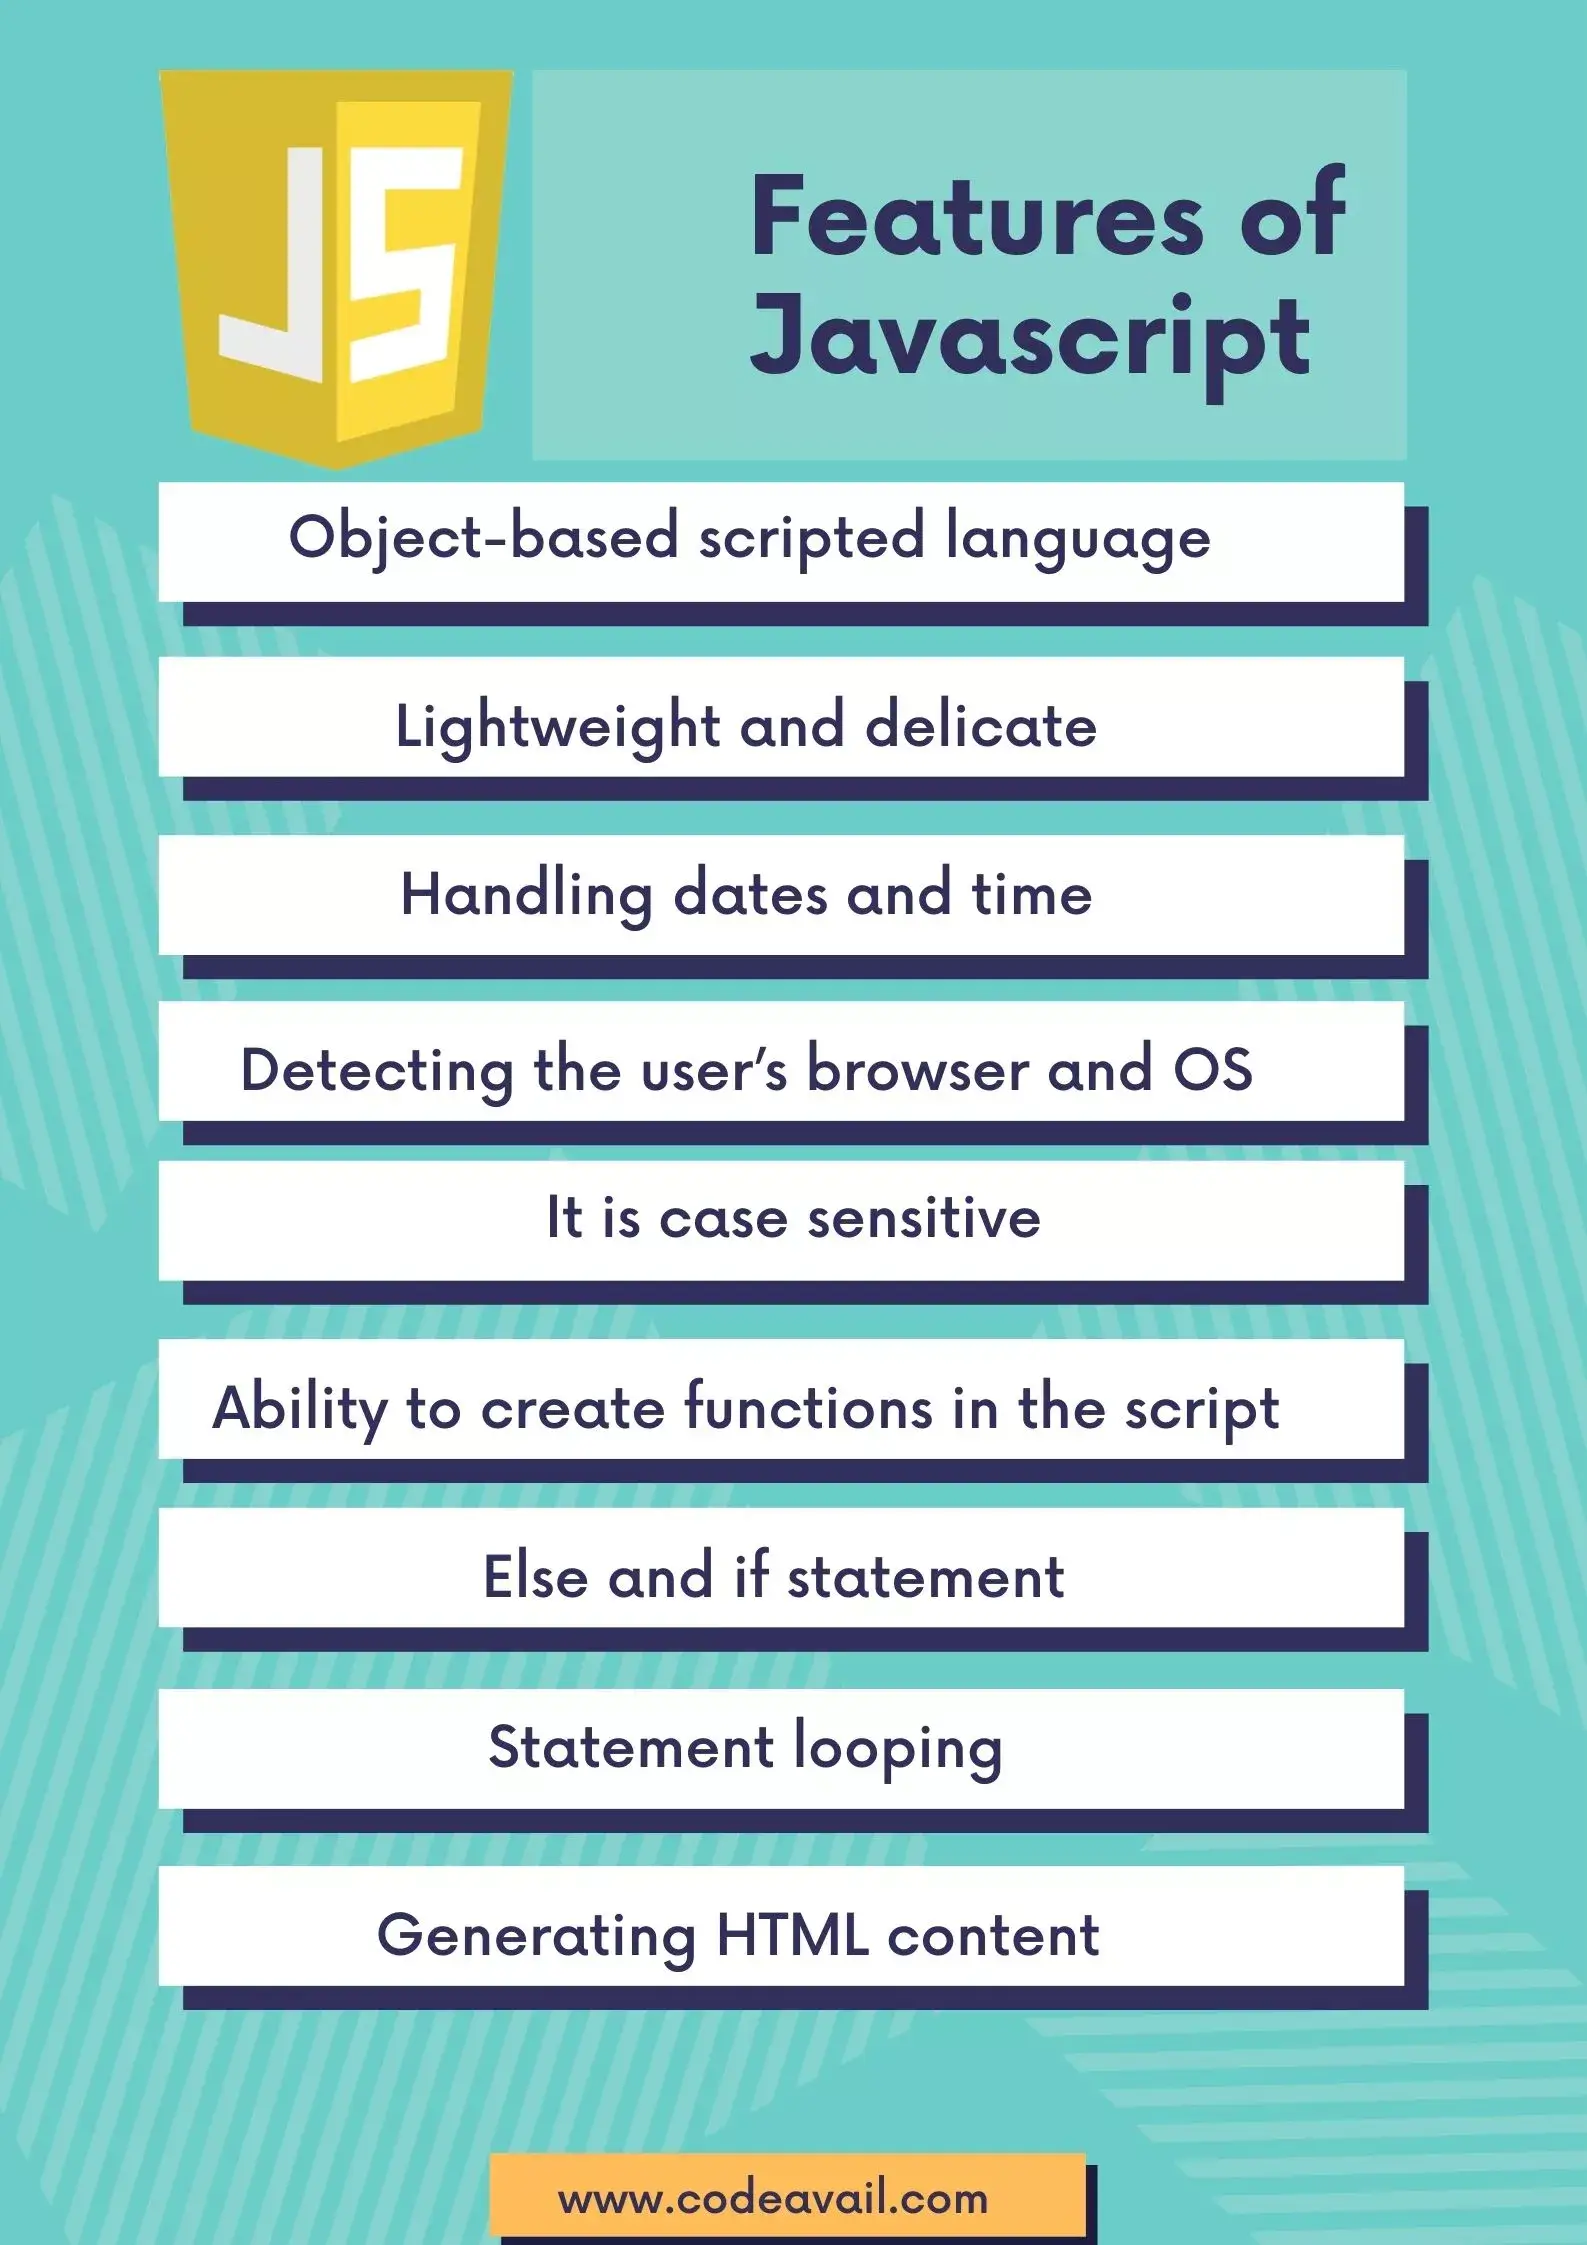 Features of Javascript